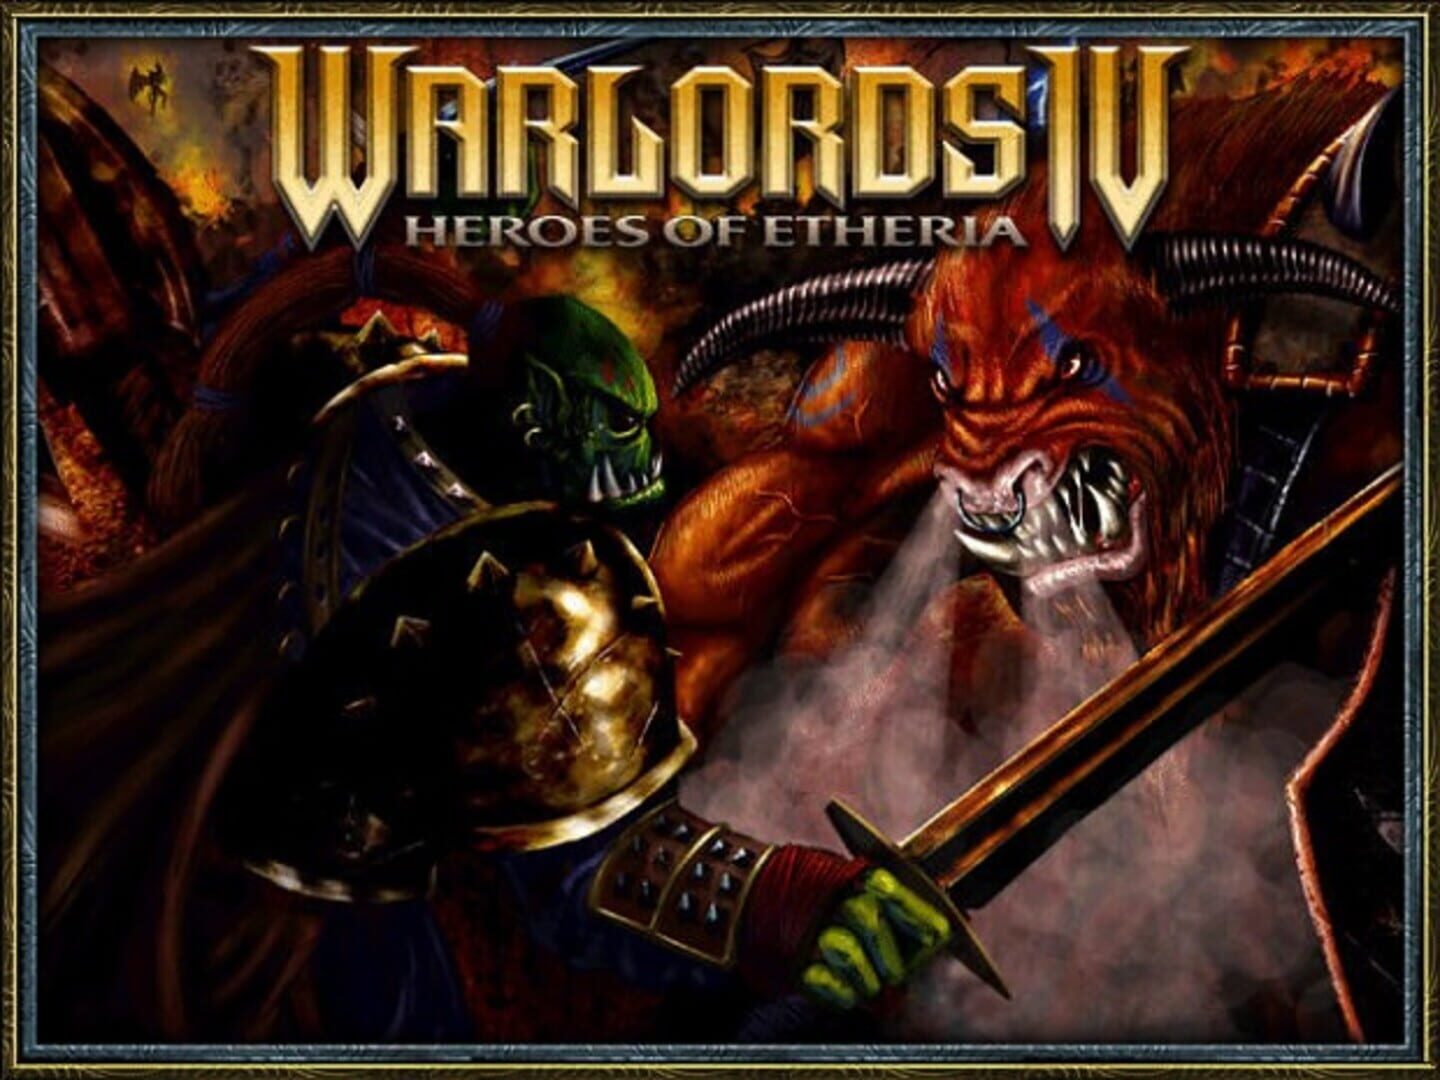 Warlords IV: Heroes of Etheria (2003)